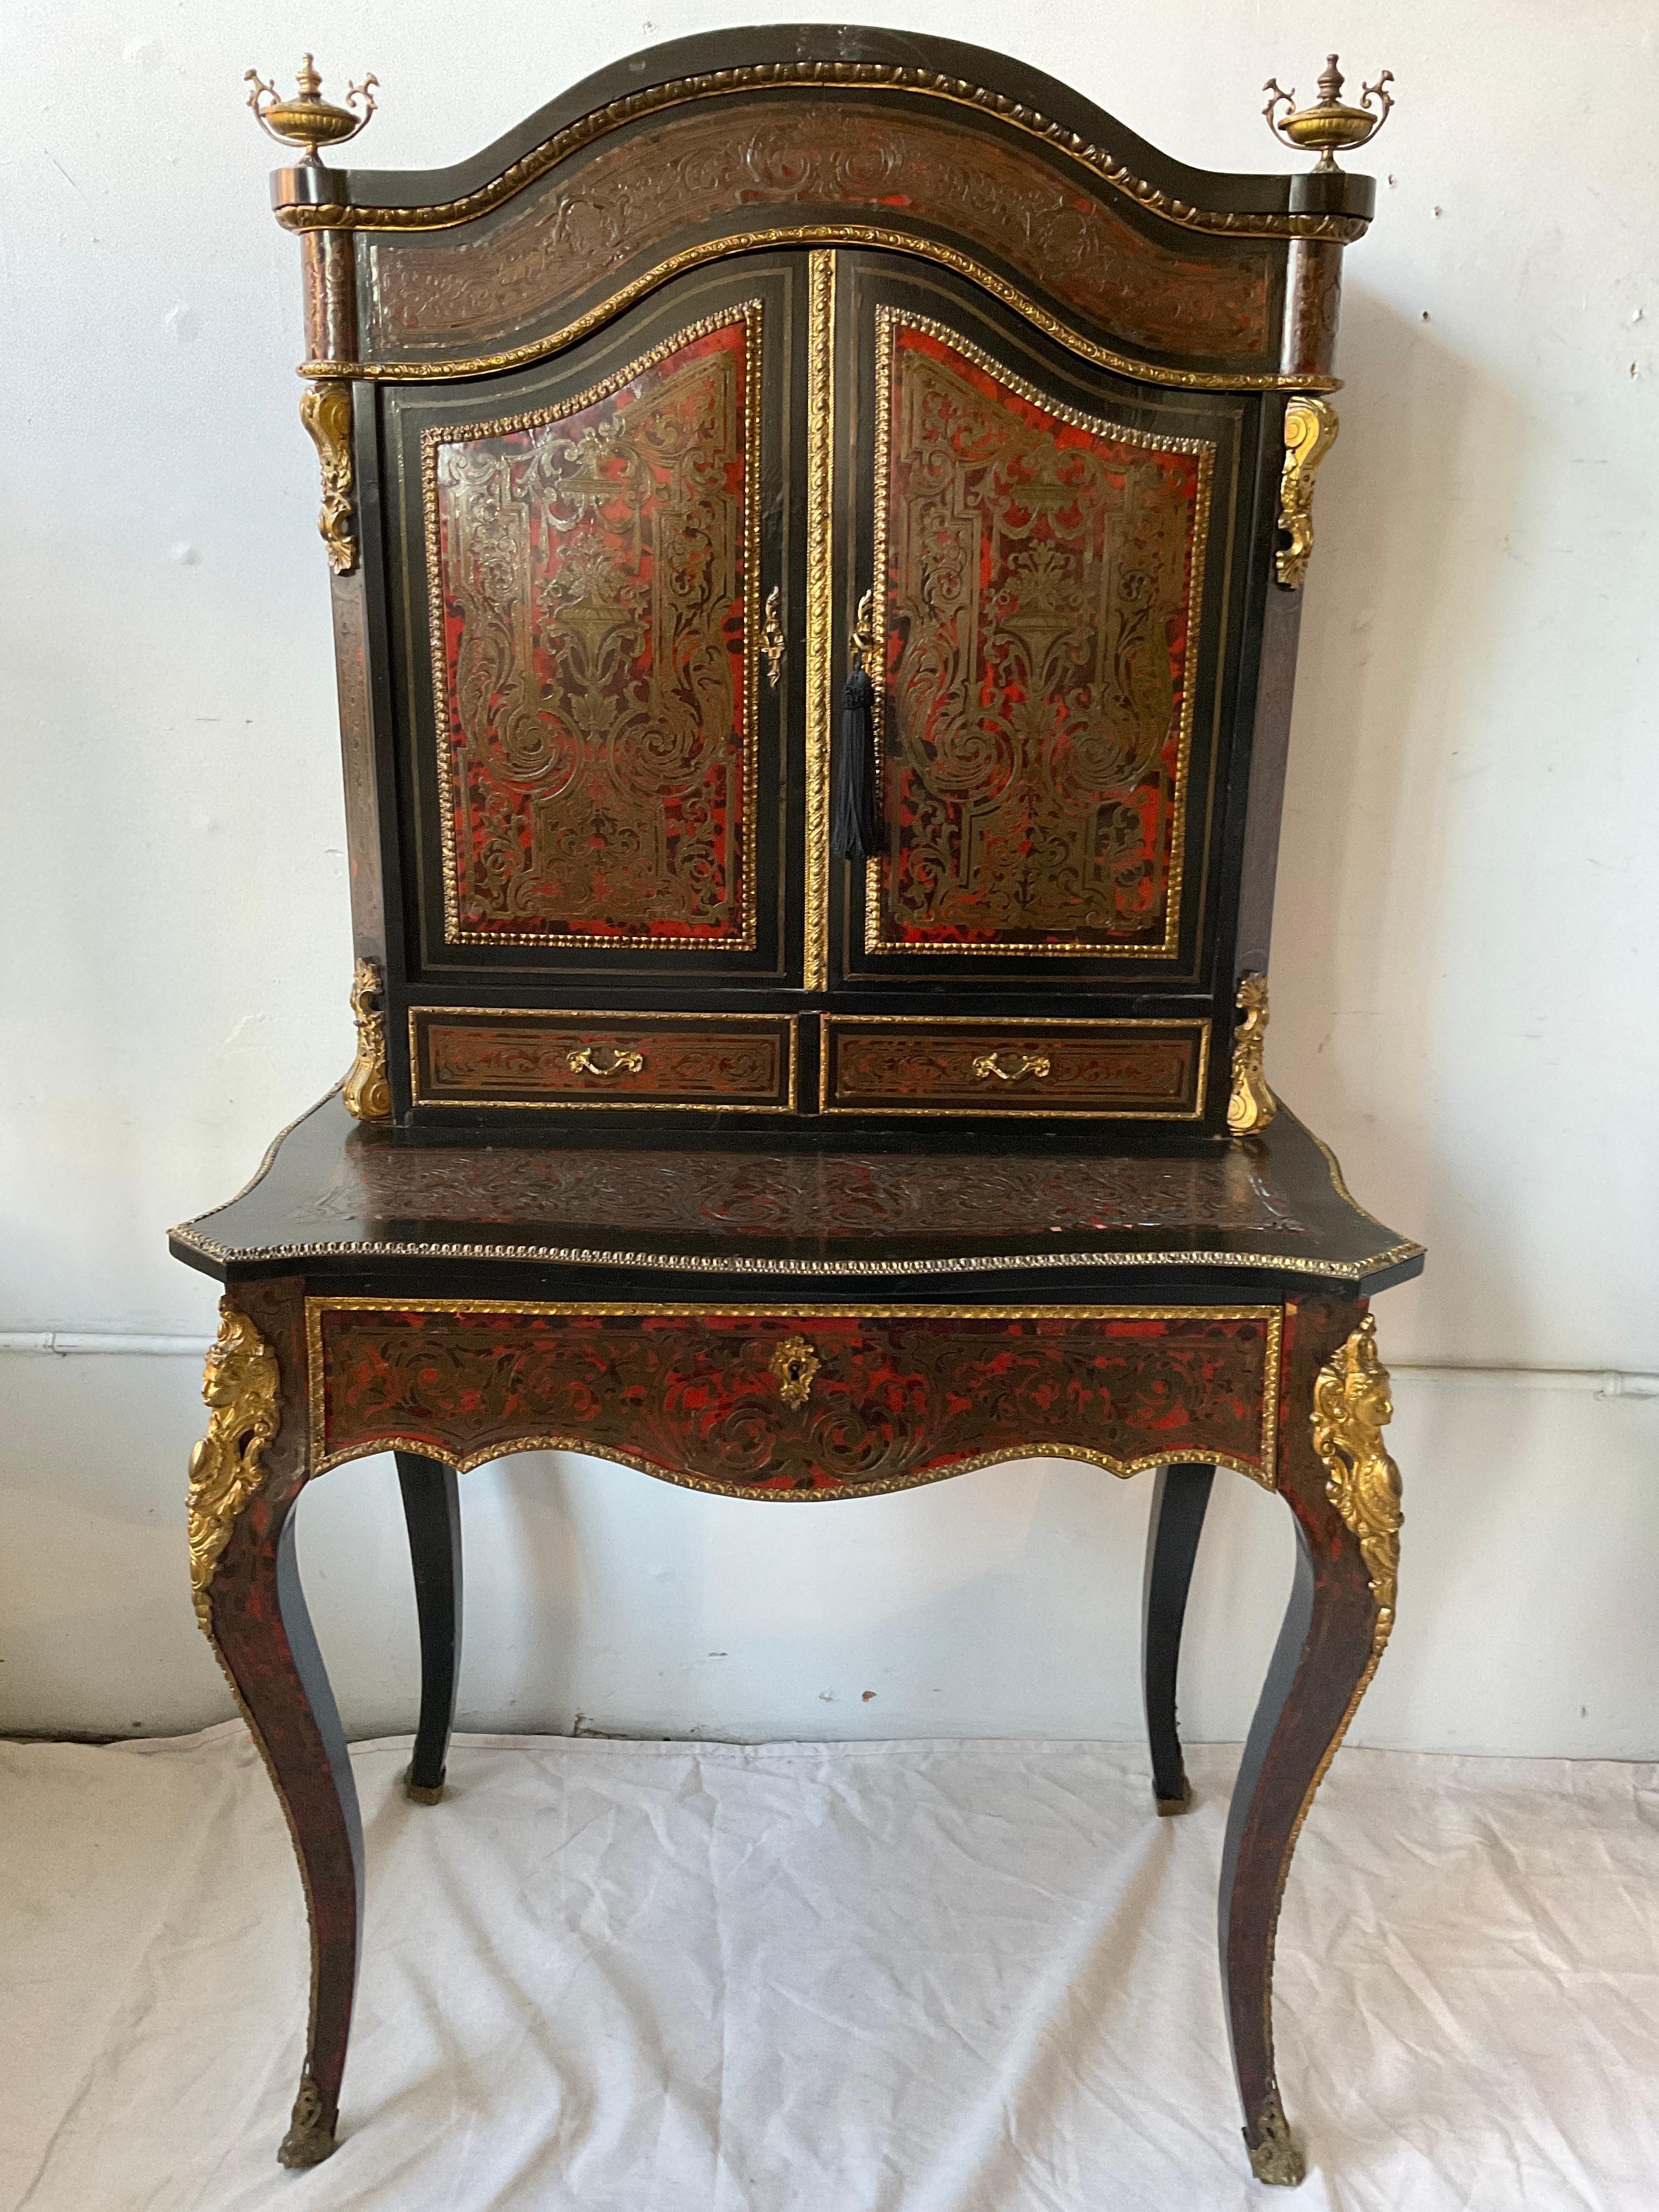 1860s French boulle writing desk. No shelves.